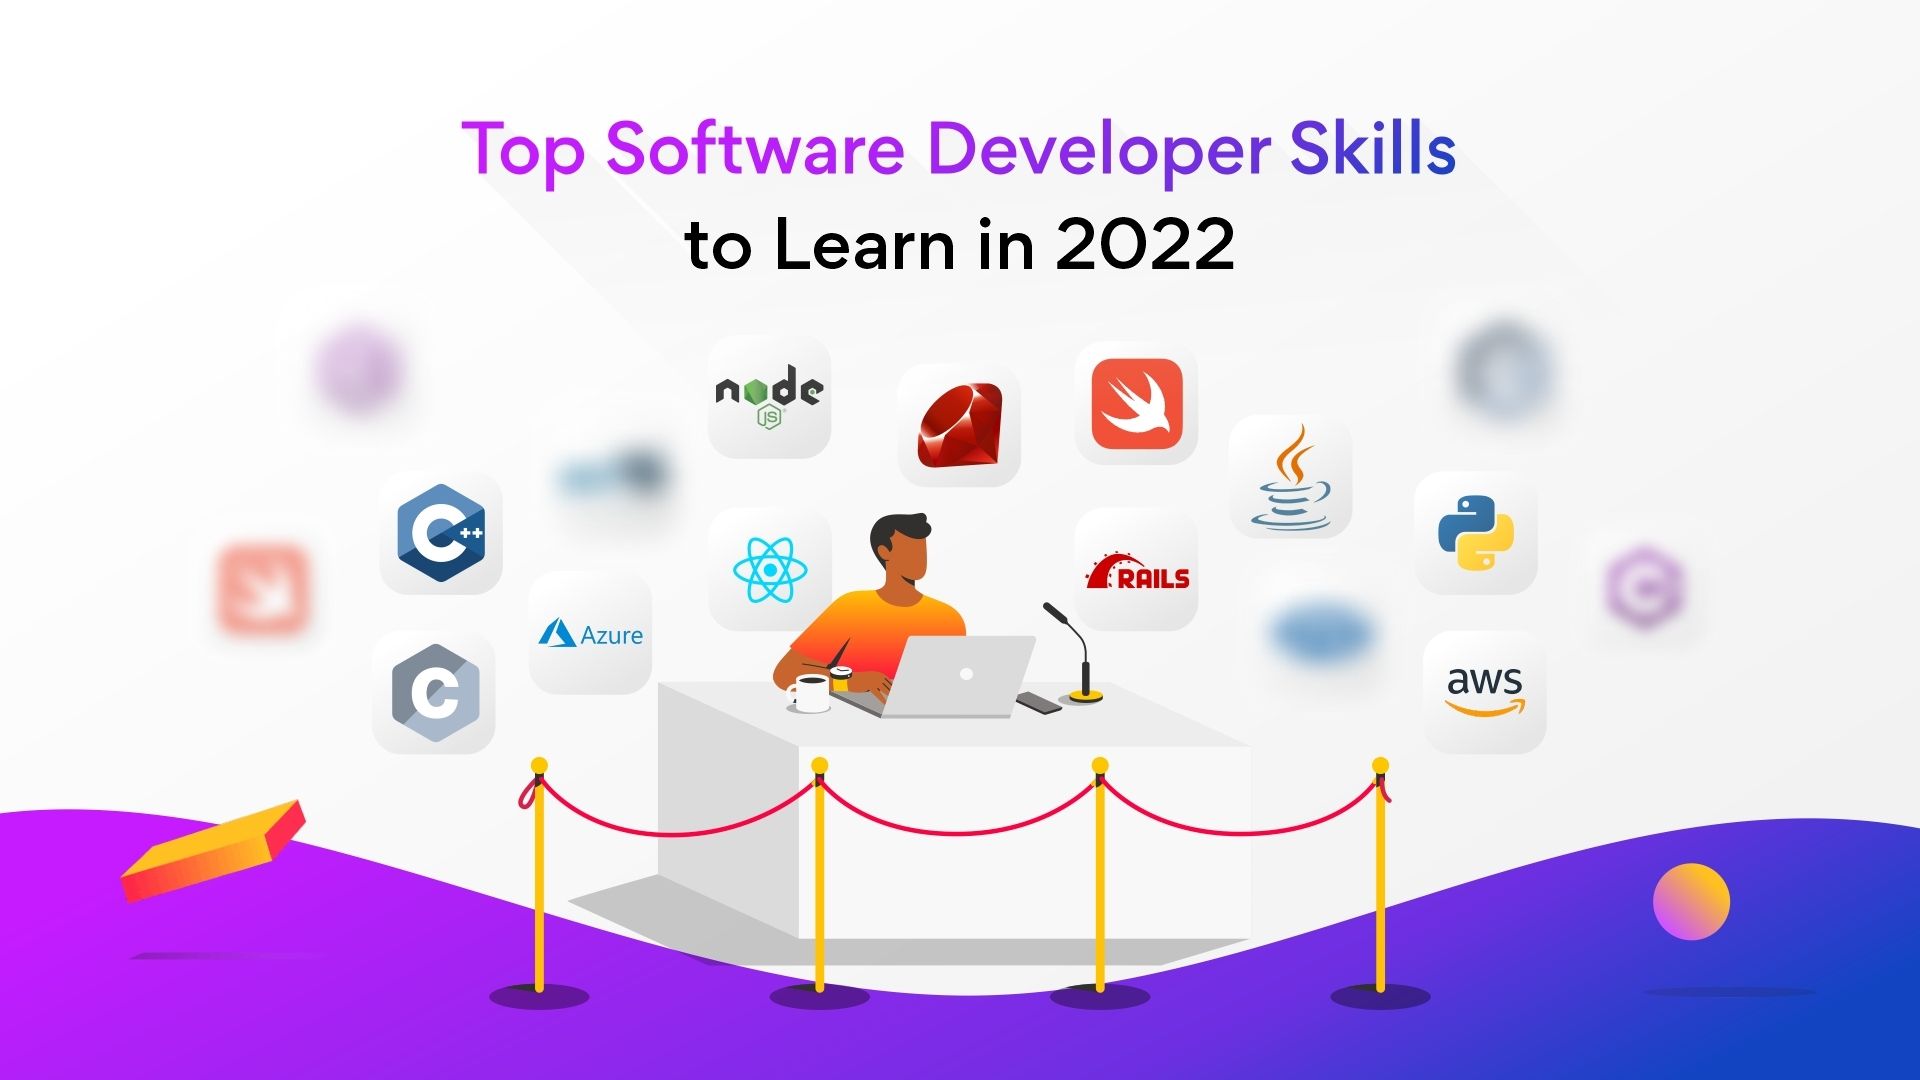 Top Software Developer Skills to Learn in 2022